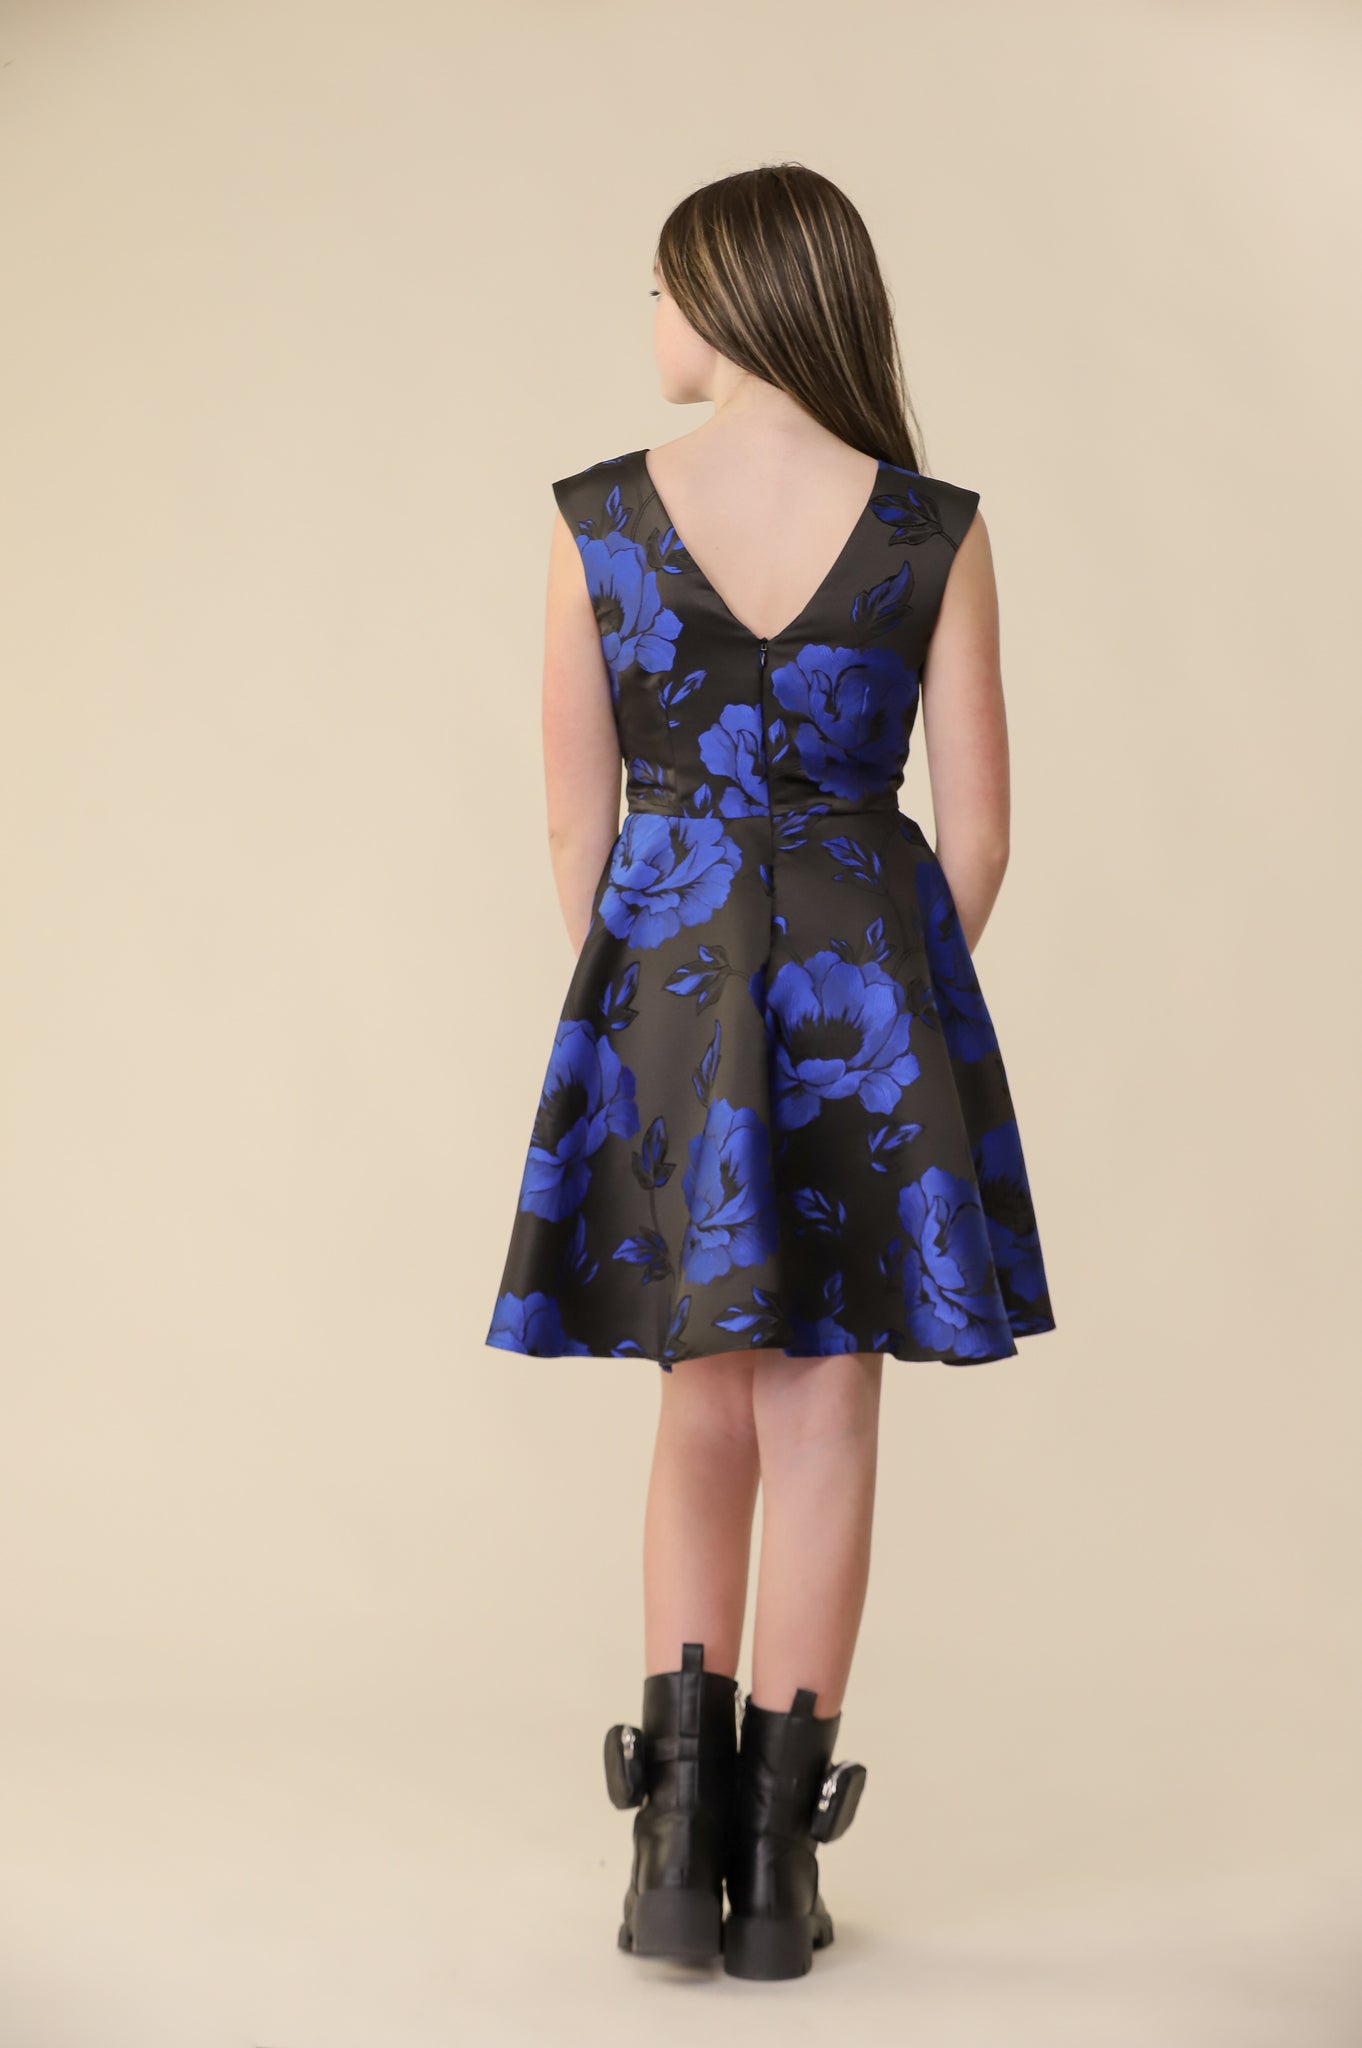 This is an all over satin, cap sleeve dress in a black and cobalt floral print pink with non-stretch material, zipper back, and longer length detailing. This dress is perfect for any religious event like bat mitzvah, cotillion or church service. 